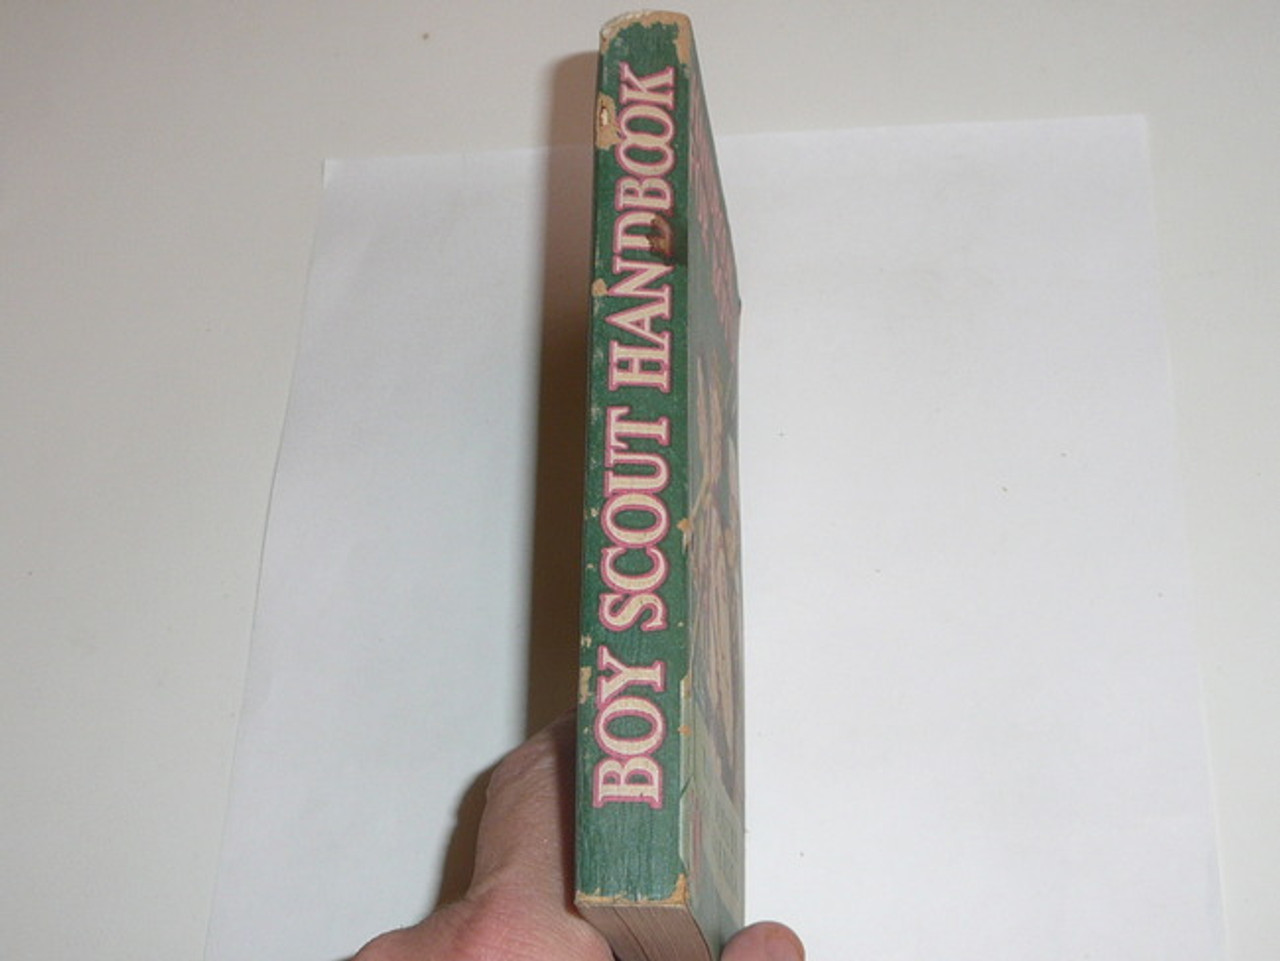 1945 Boy Scout Handbook, Fourth Edition, Thirty-eighth Printing, Norman Rockwell Cover,  lite edge wear